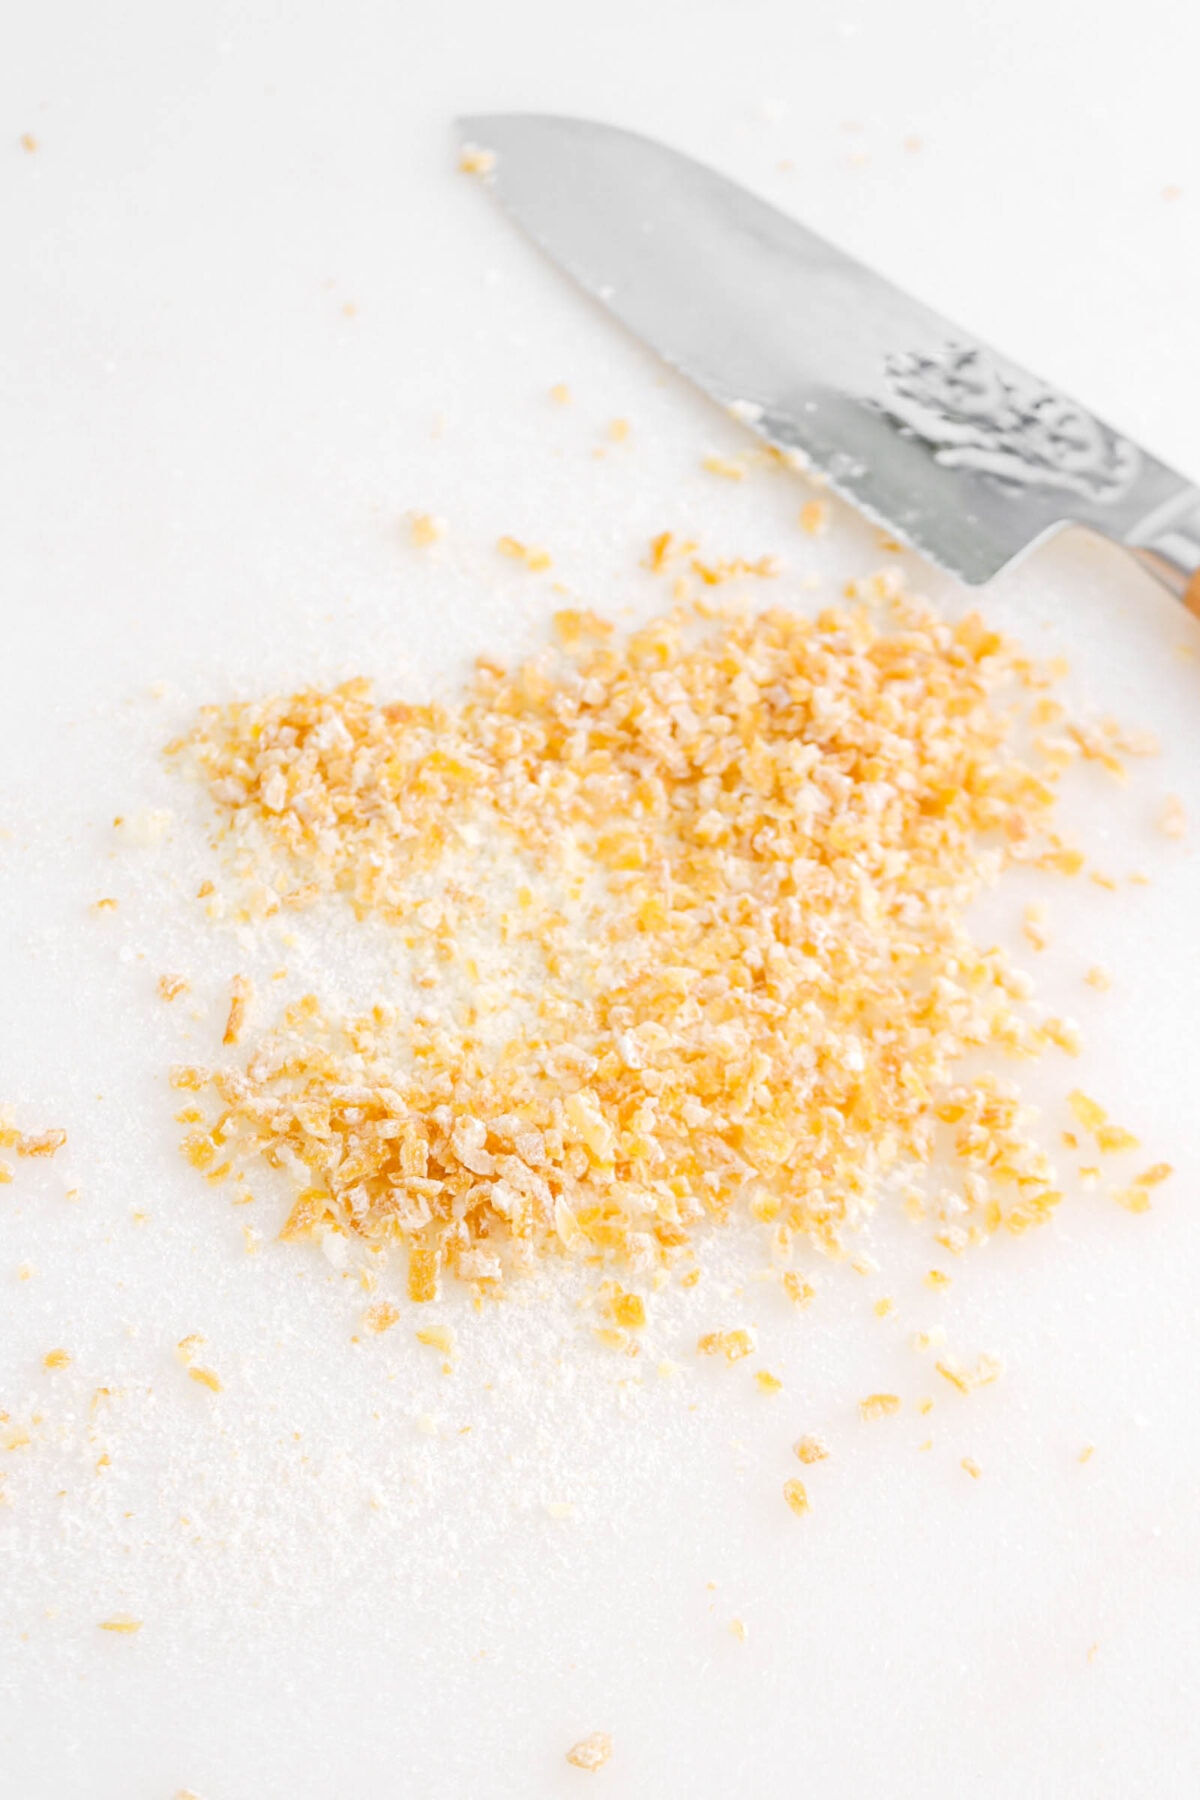 chopped candied lemon peel with knife beside